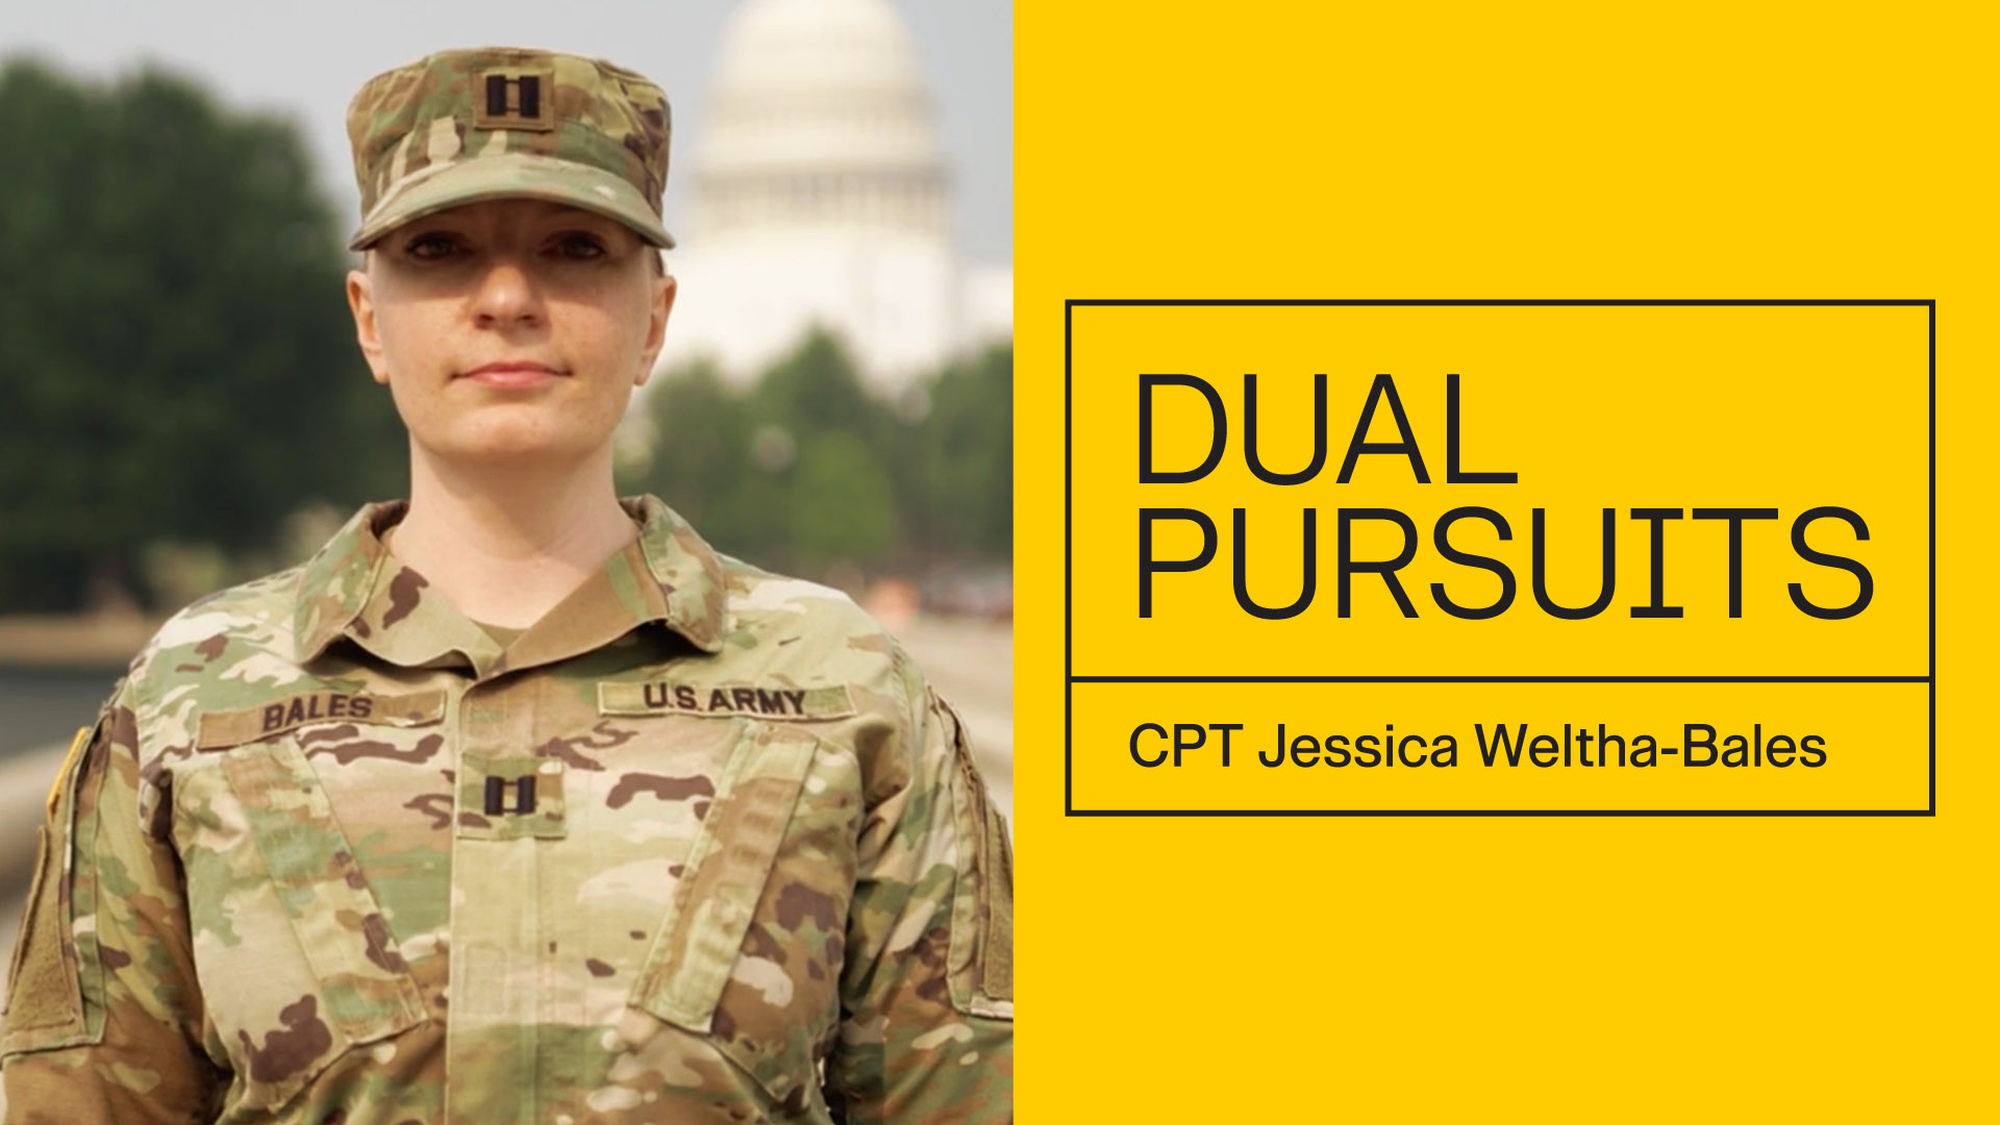 Army Reserve Capt. Jessica Weltha-Bales shares how she's pursuing her passions and being all she can be through serving part time.